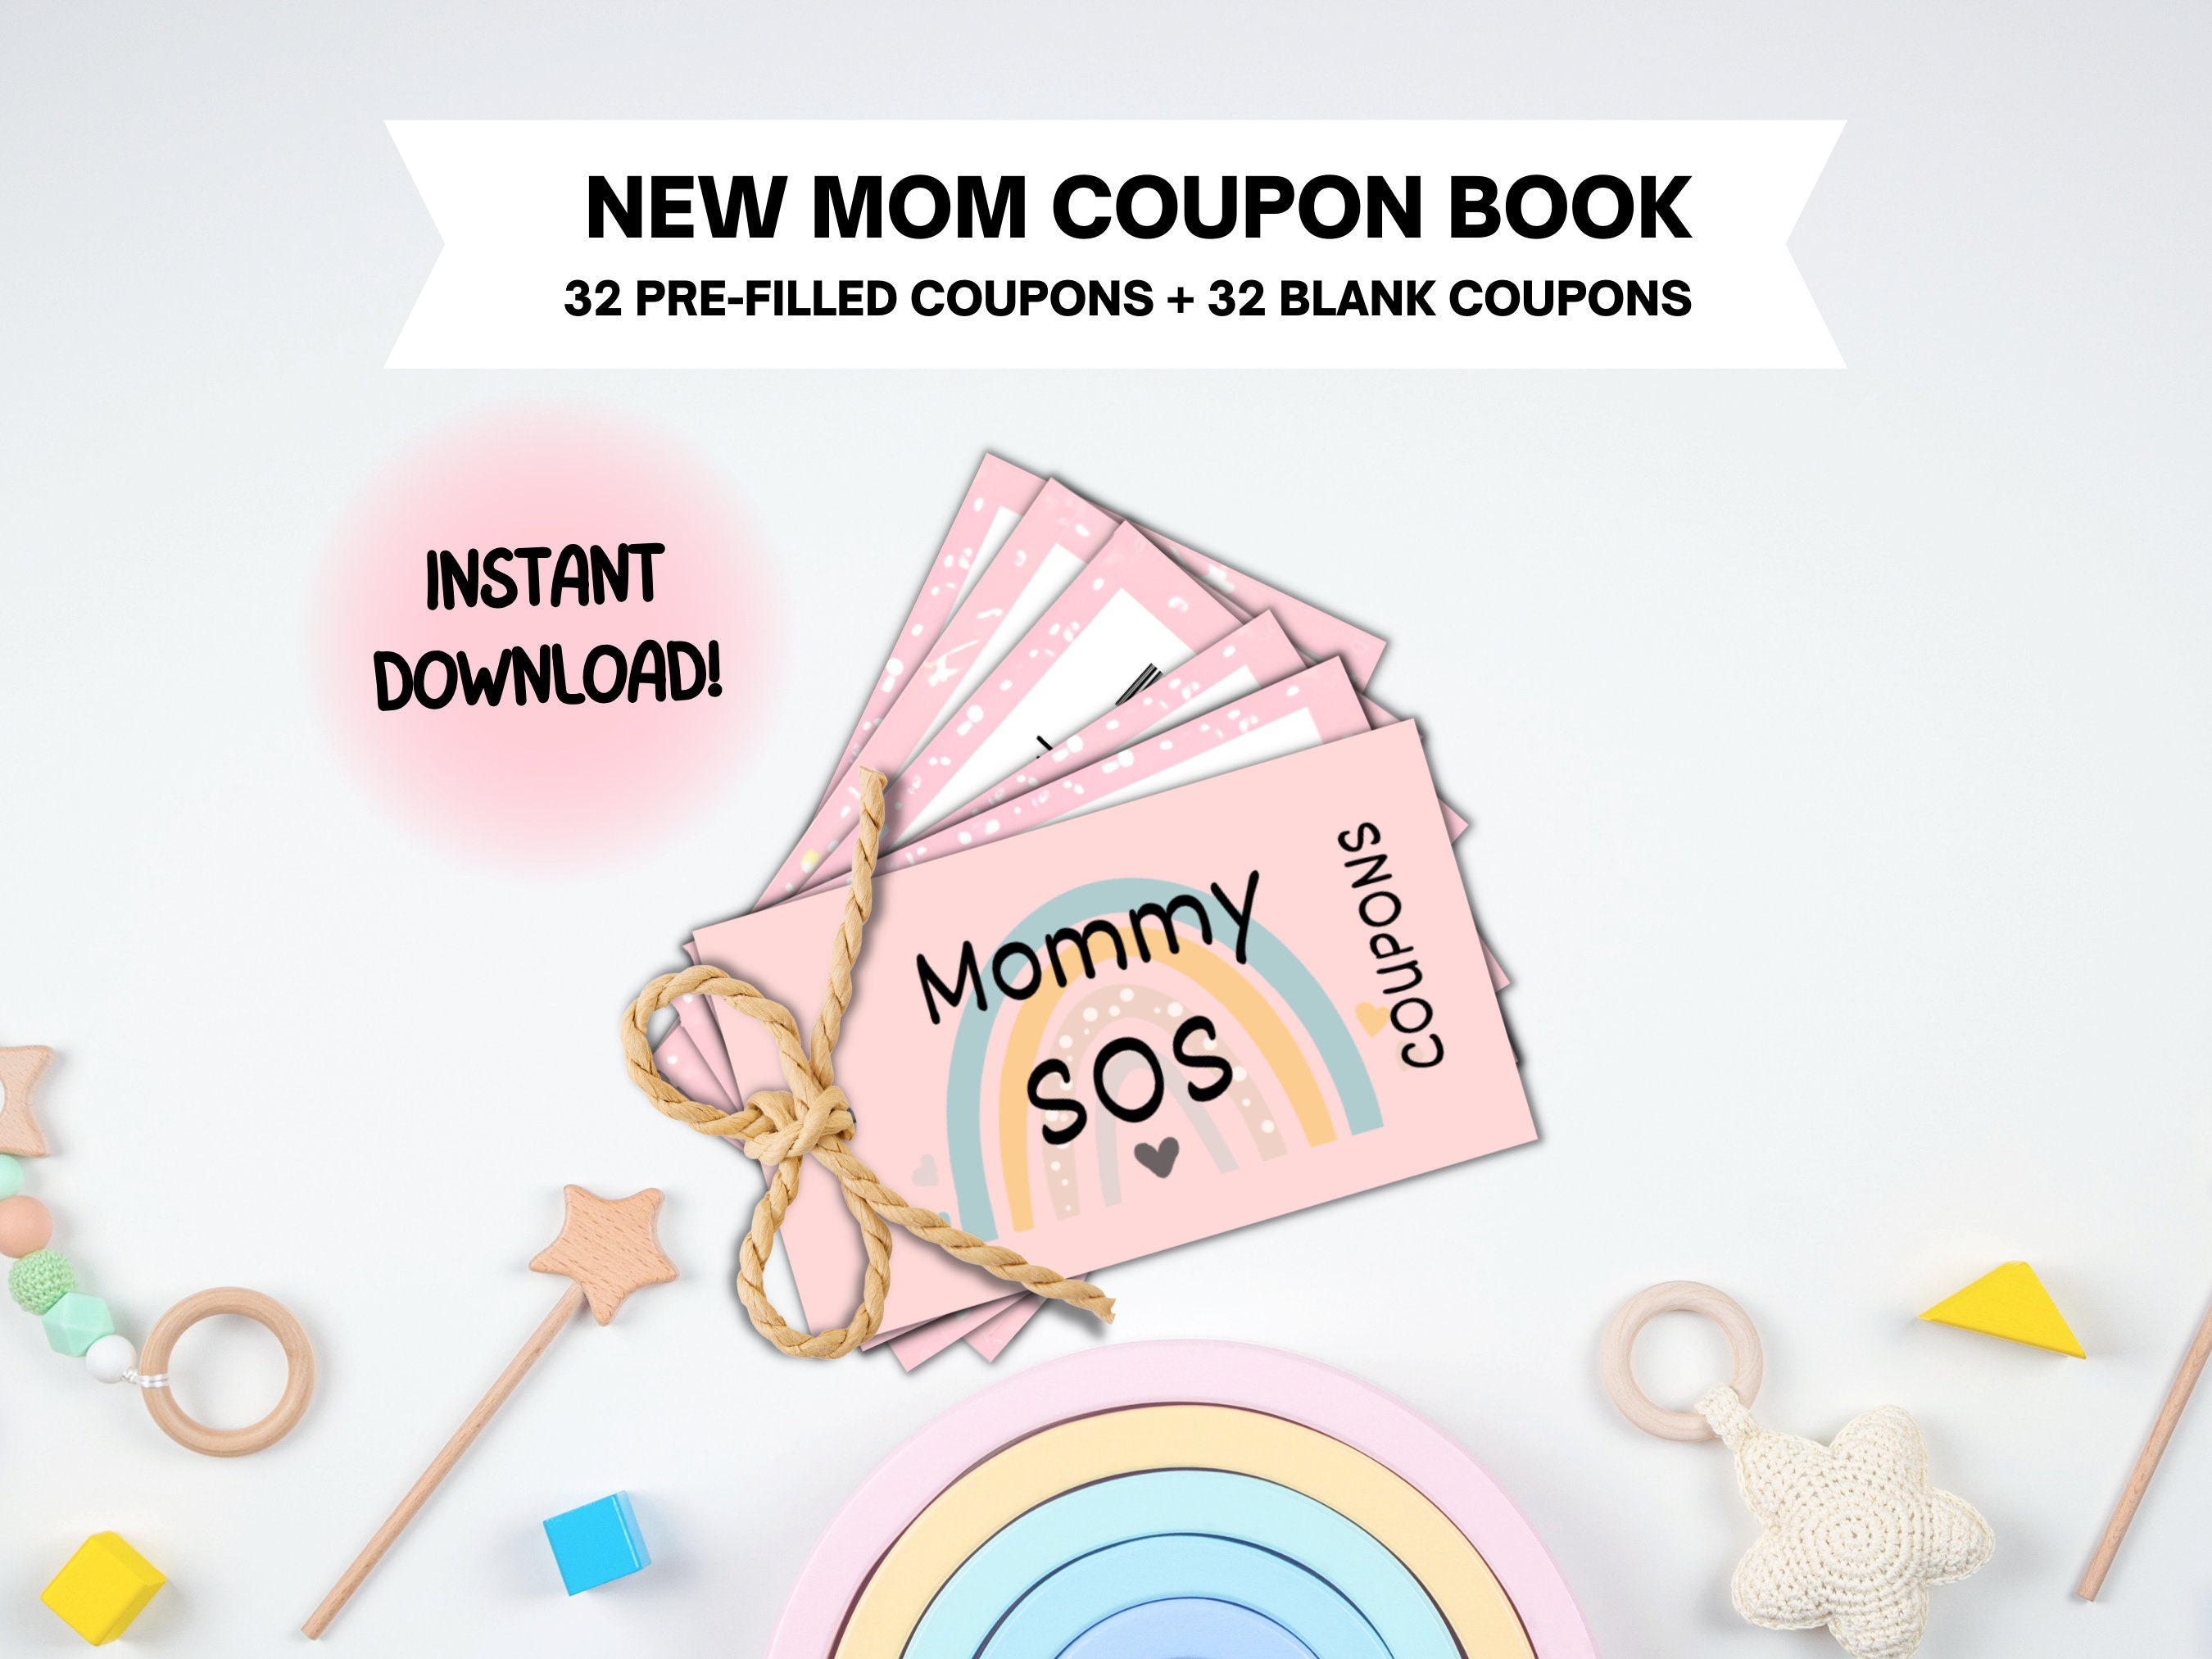 Discounts & Coupons for New Moms